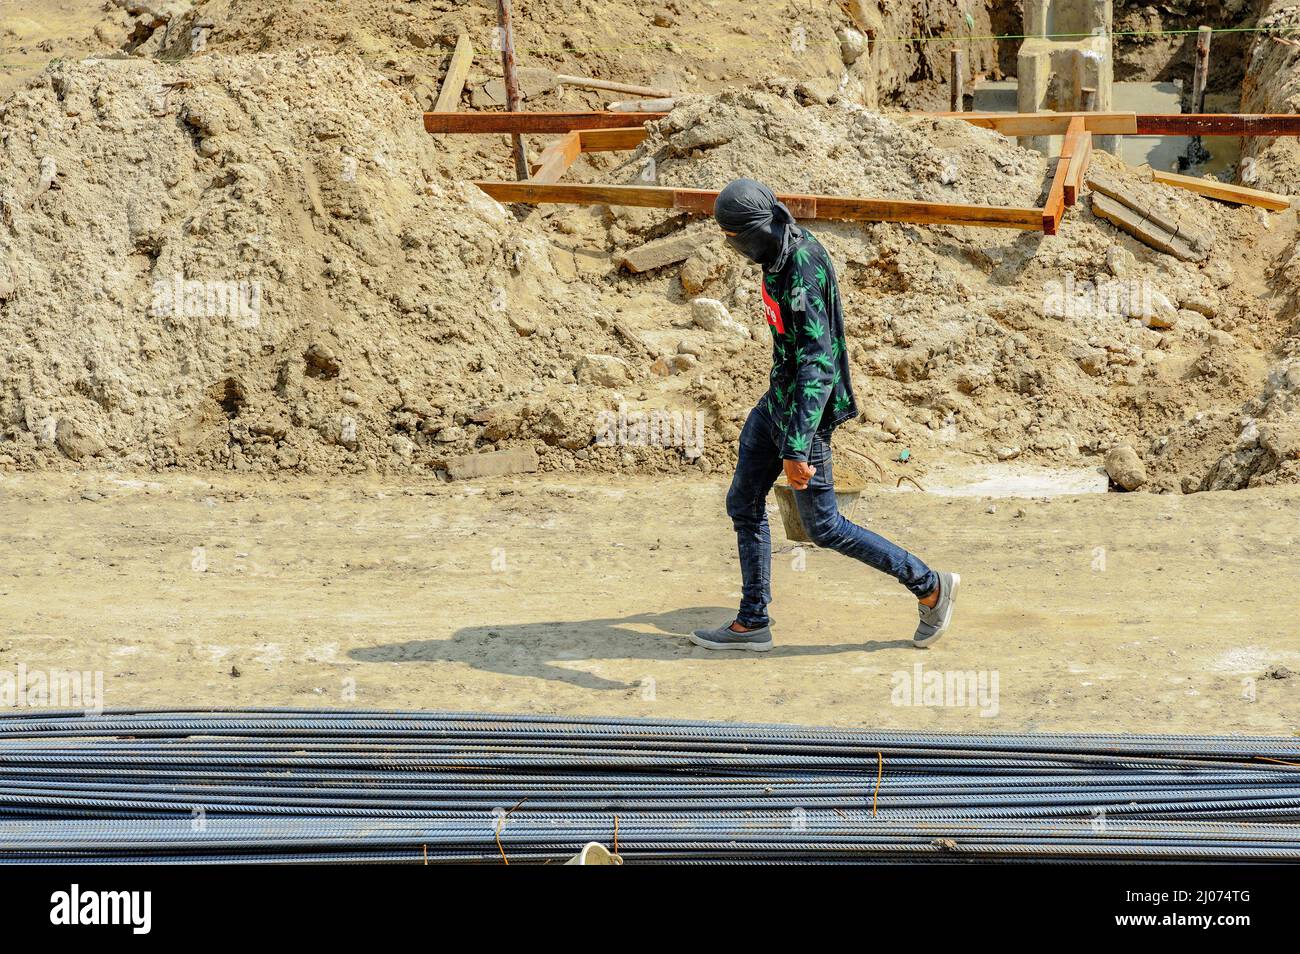 A construction worker on site carrying a bucketful of sand walks hastily in the scorching sun. Stock Photo